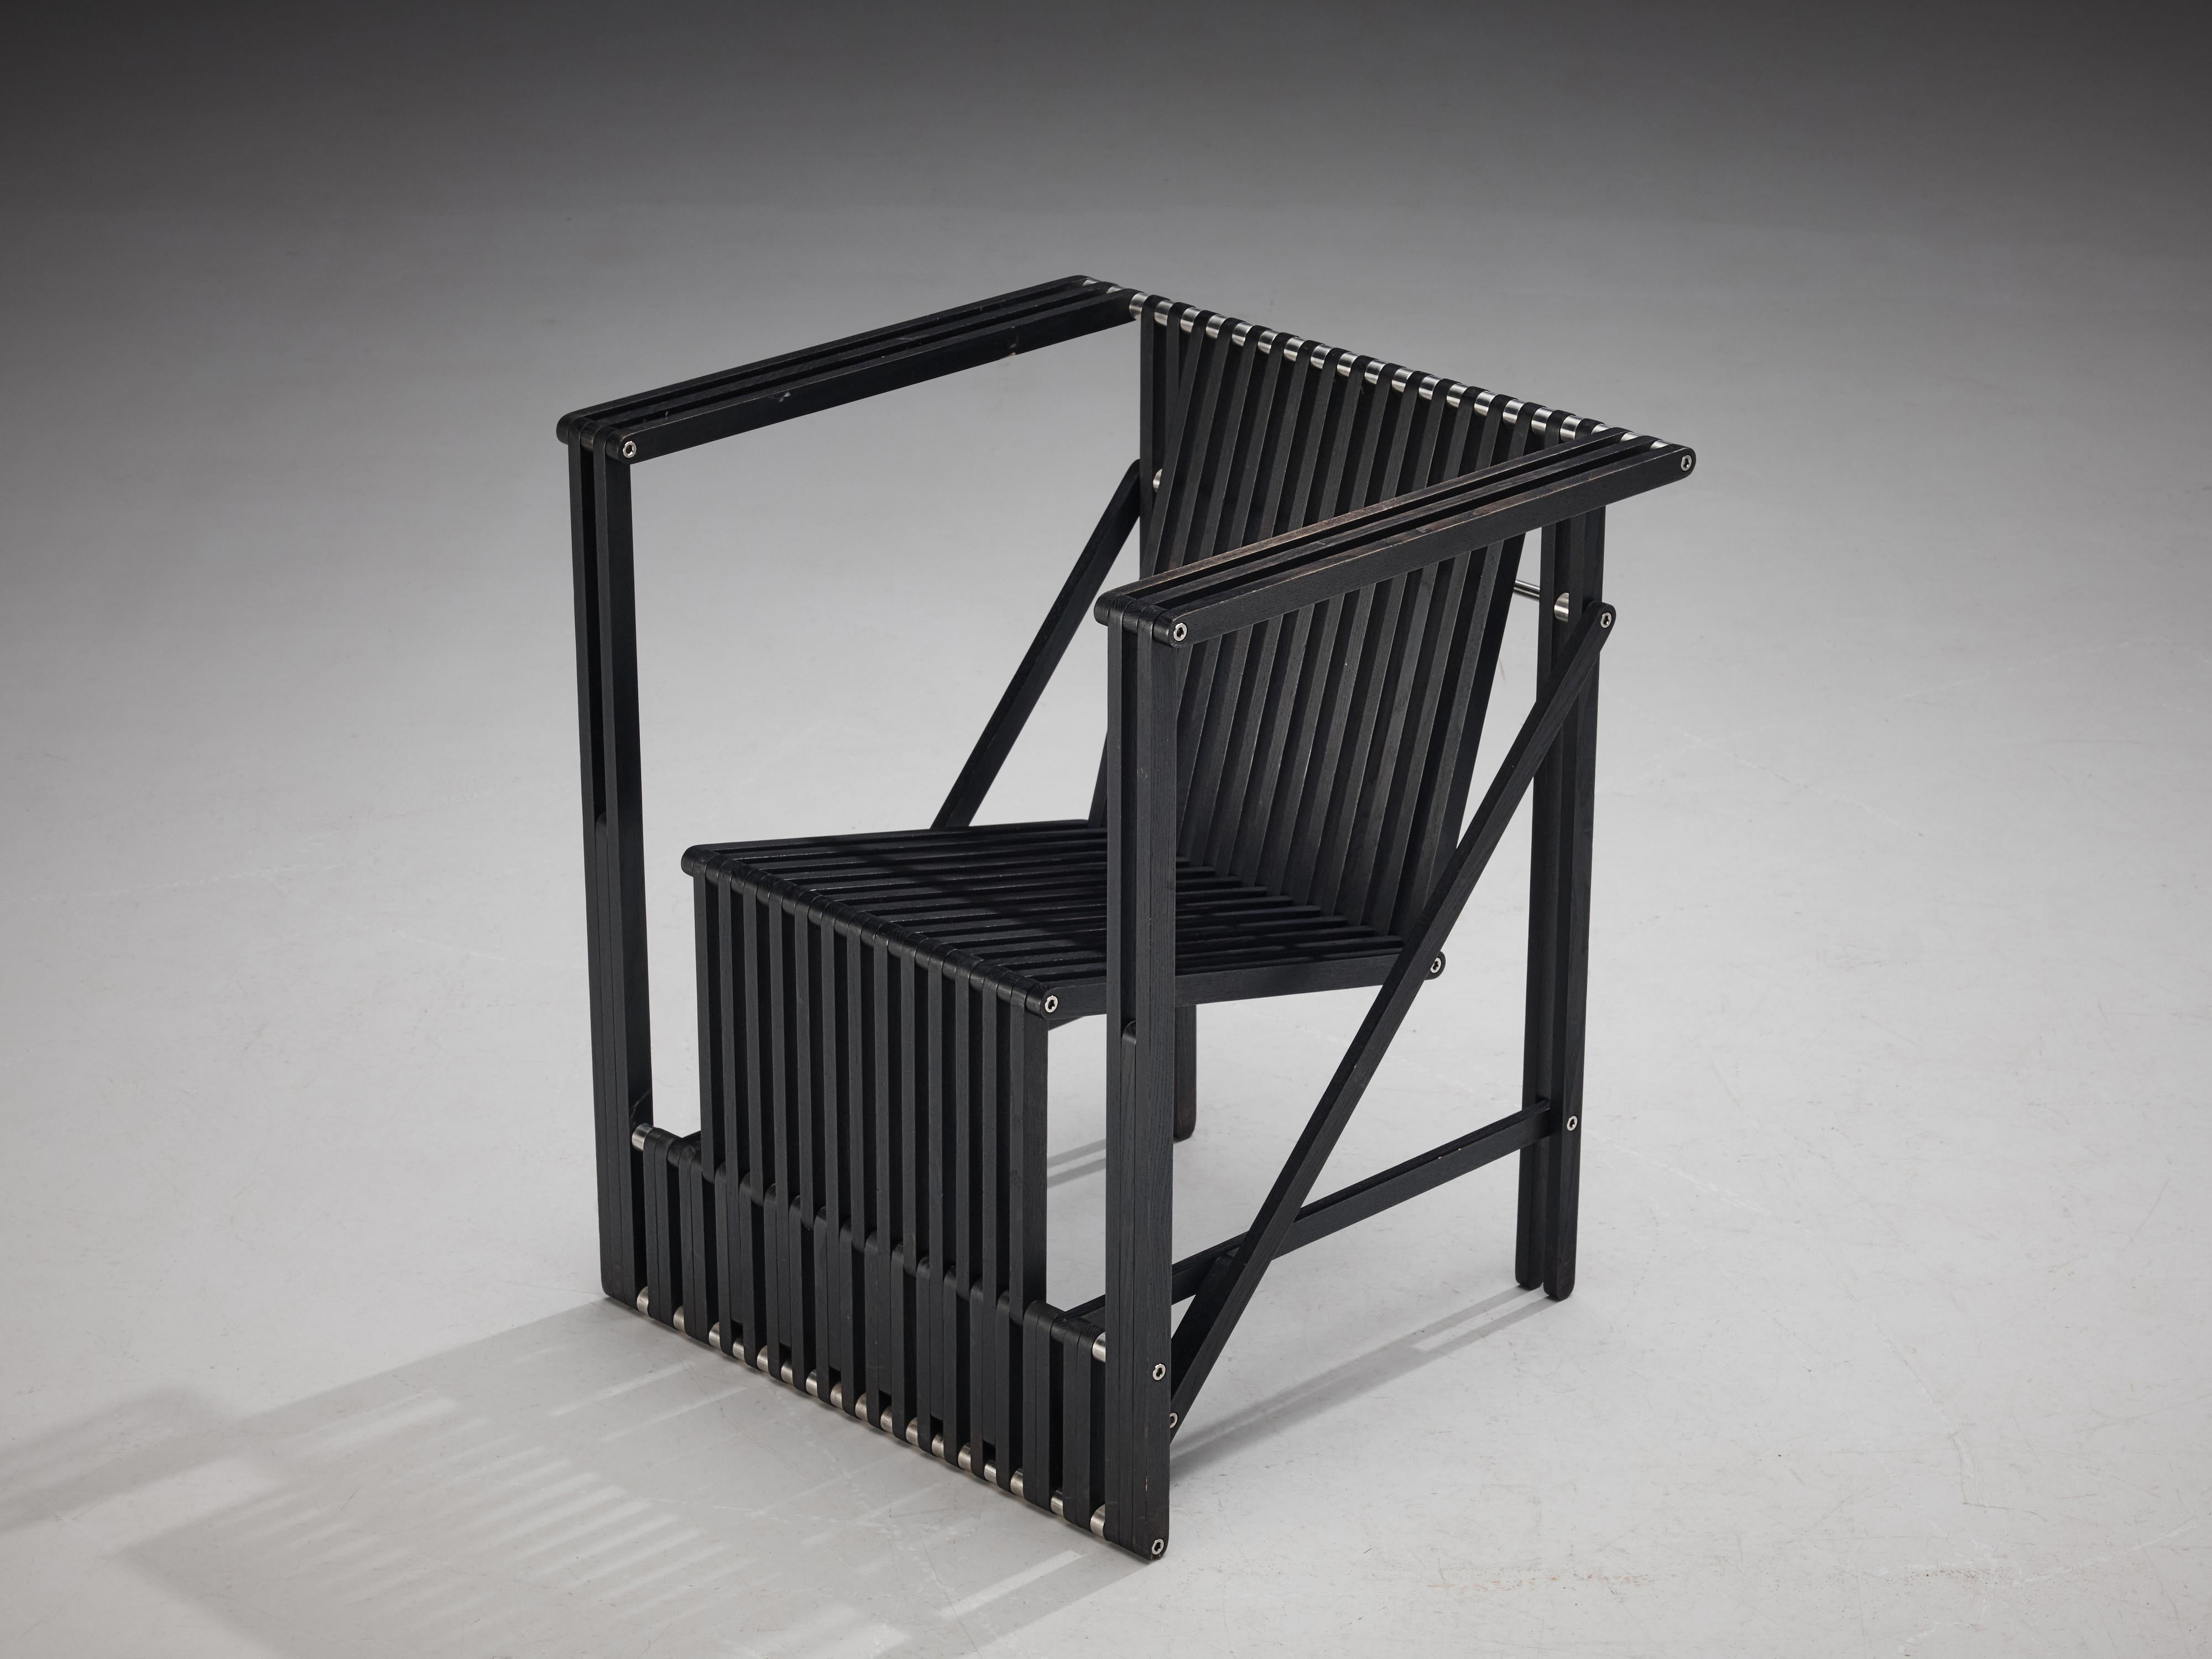 Norbert Wangen, folding armchair, model 'Attila', lacquered ash, metal, Germany, 1995.

Contemporary folding armchair model 'Attila' in black lacquered ash designed by the German designer Norbert Wangen (1962). Its inventive frame contains multiple